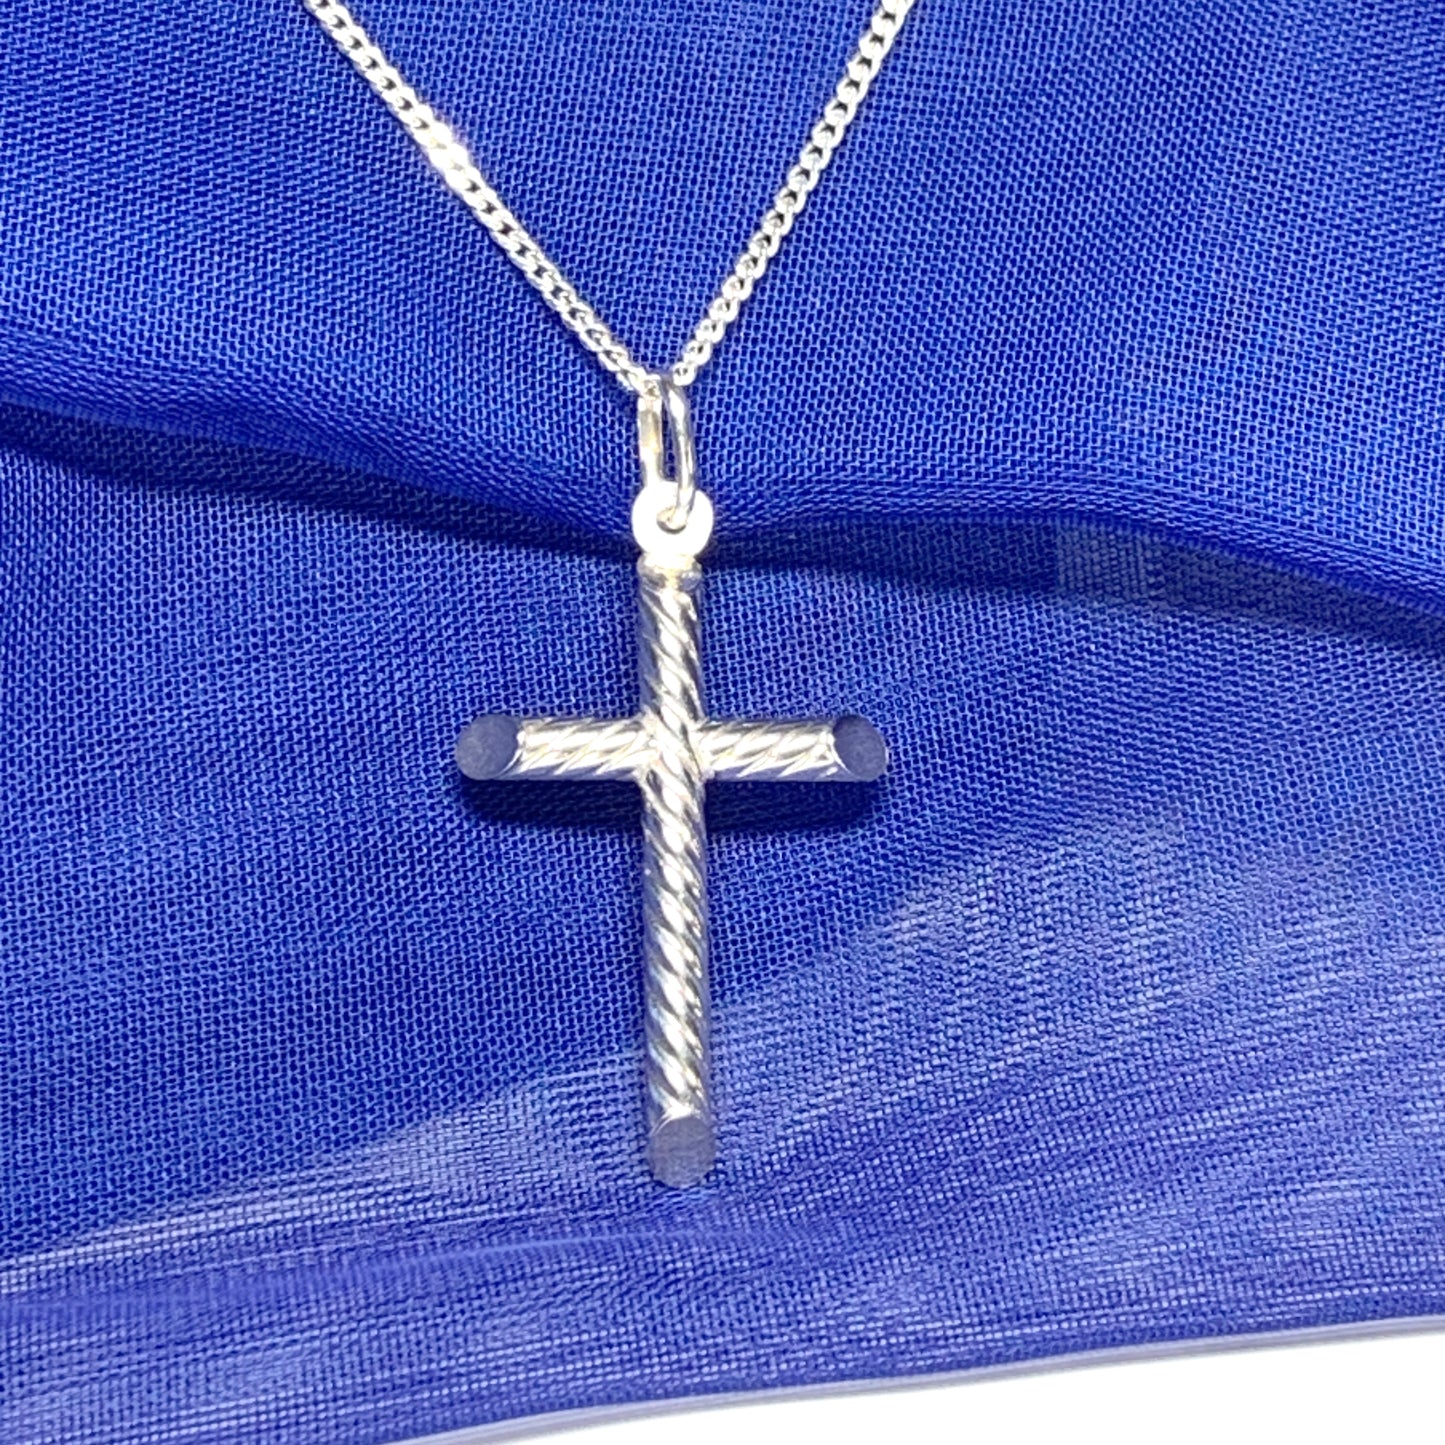 Solid diamond cut cross patterned sterling silver and chain